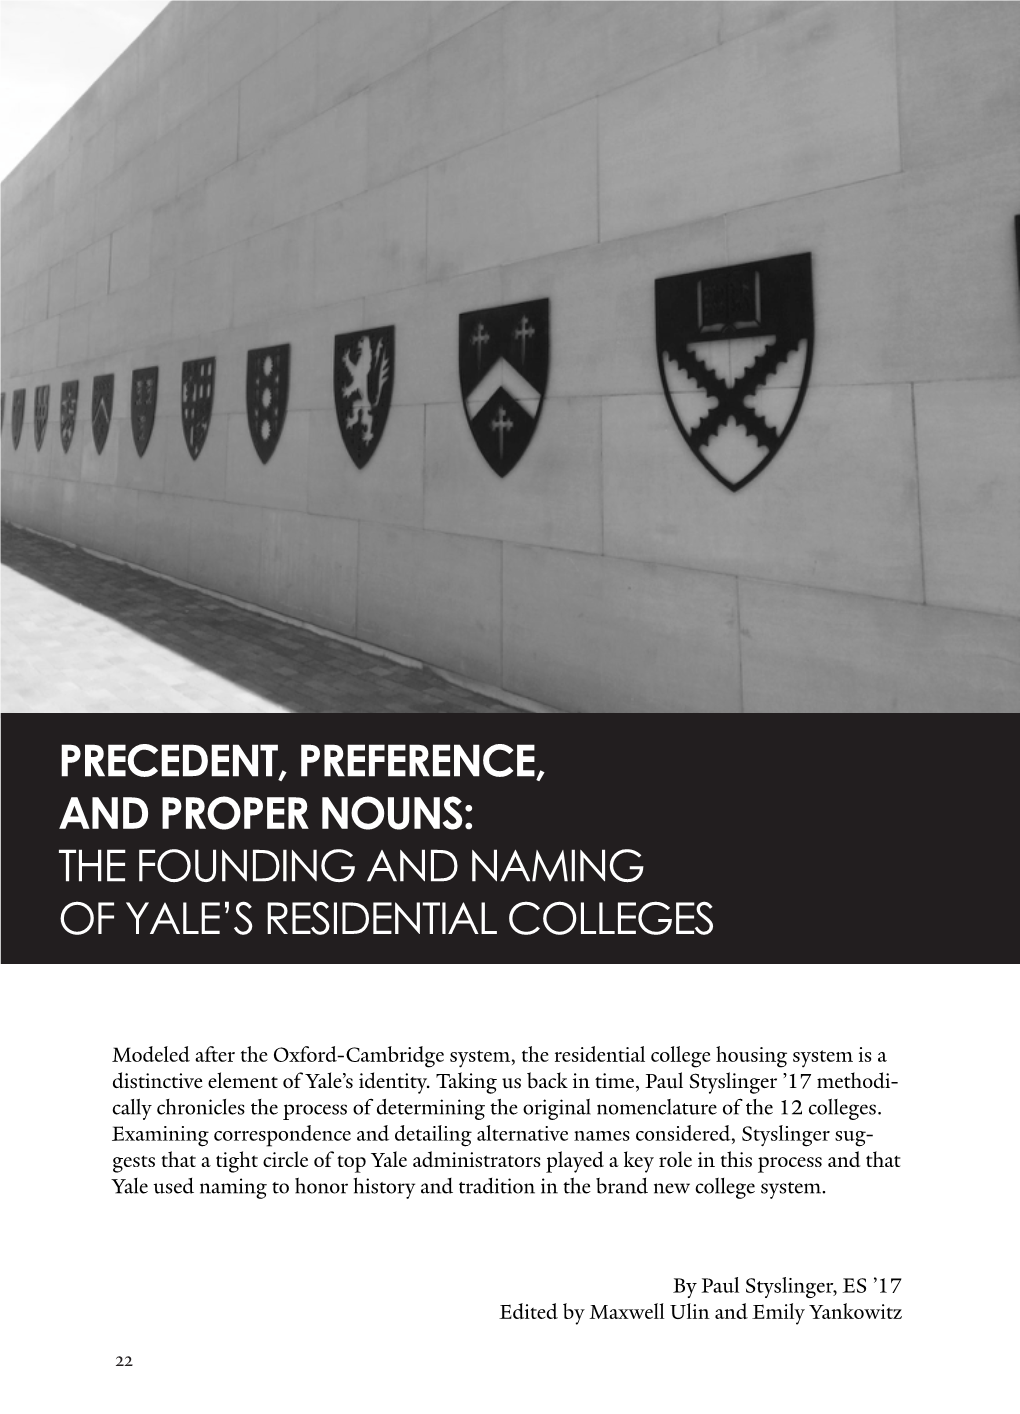 The Founding and Naming of Yale’S Residential Colleges